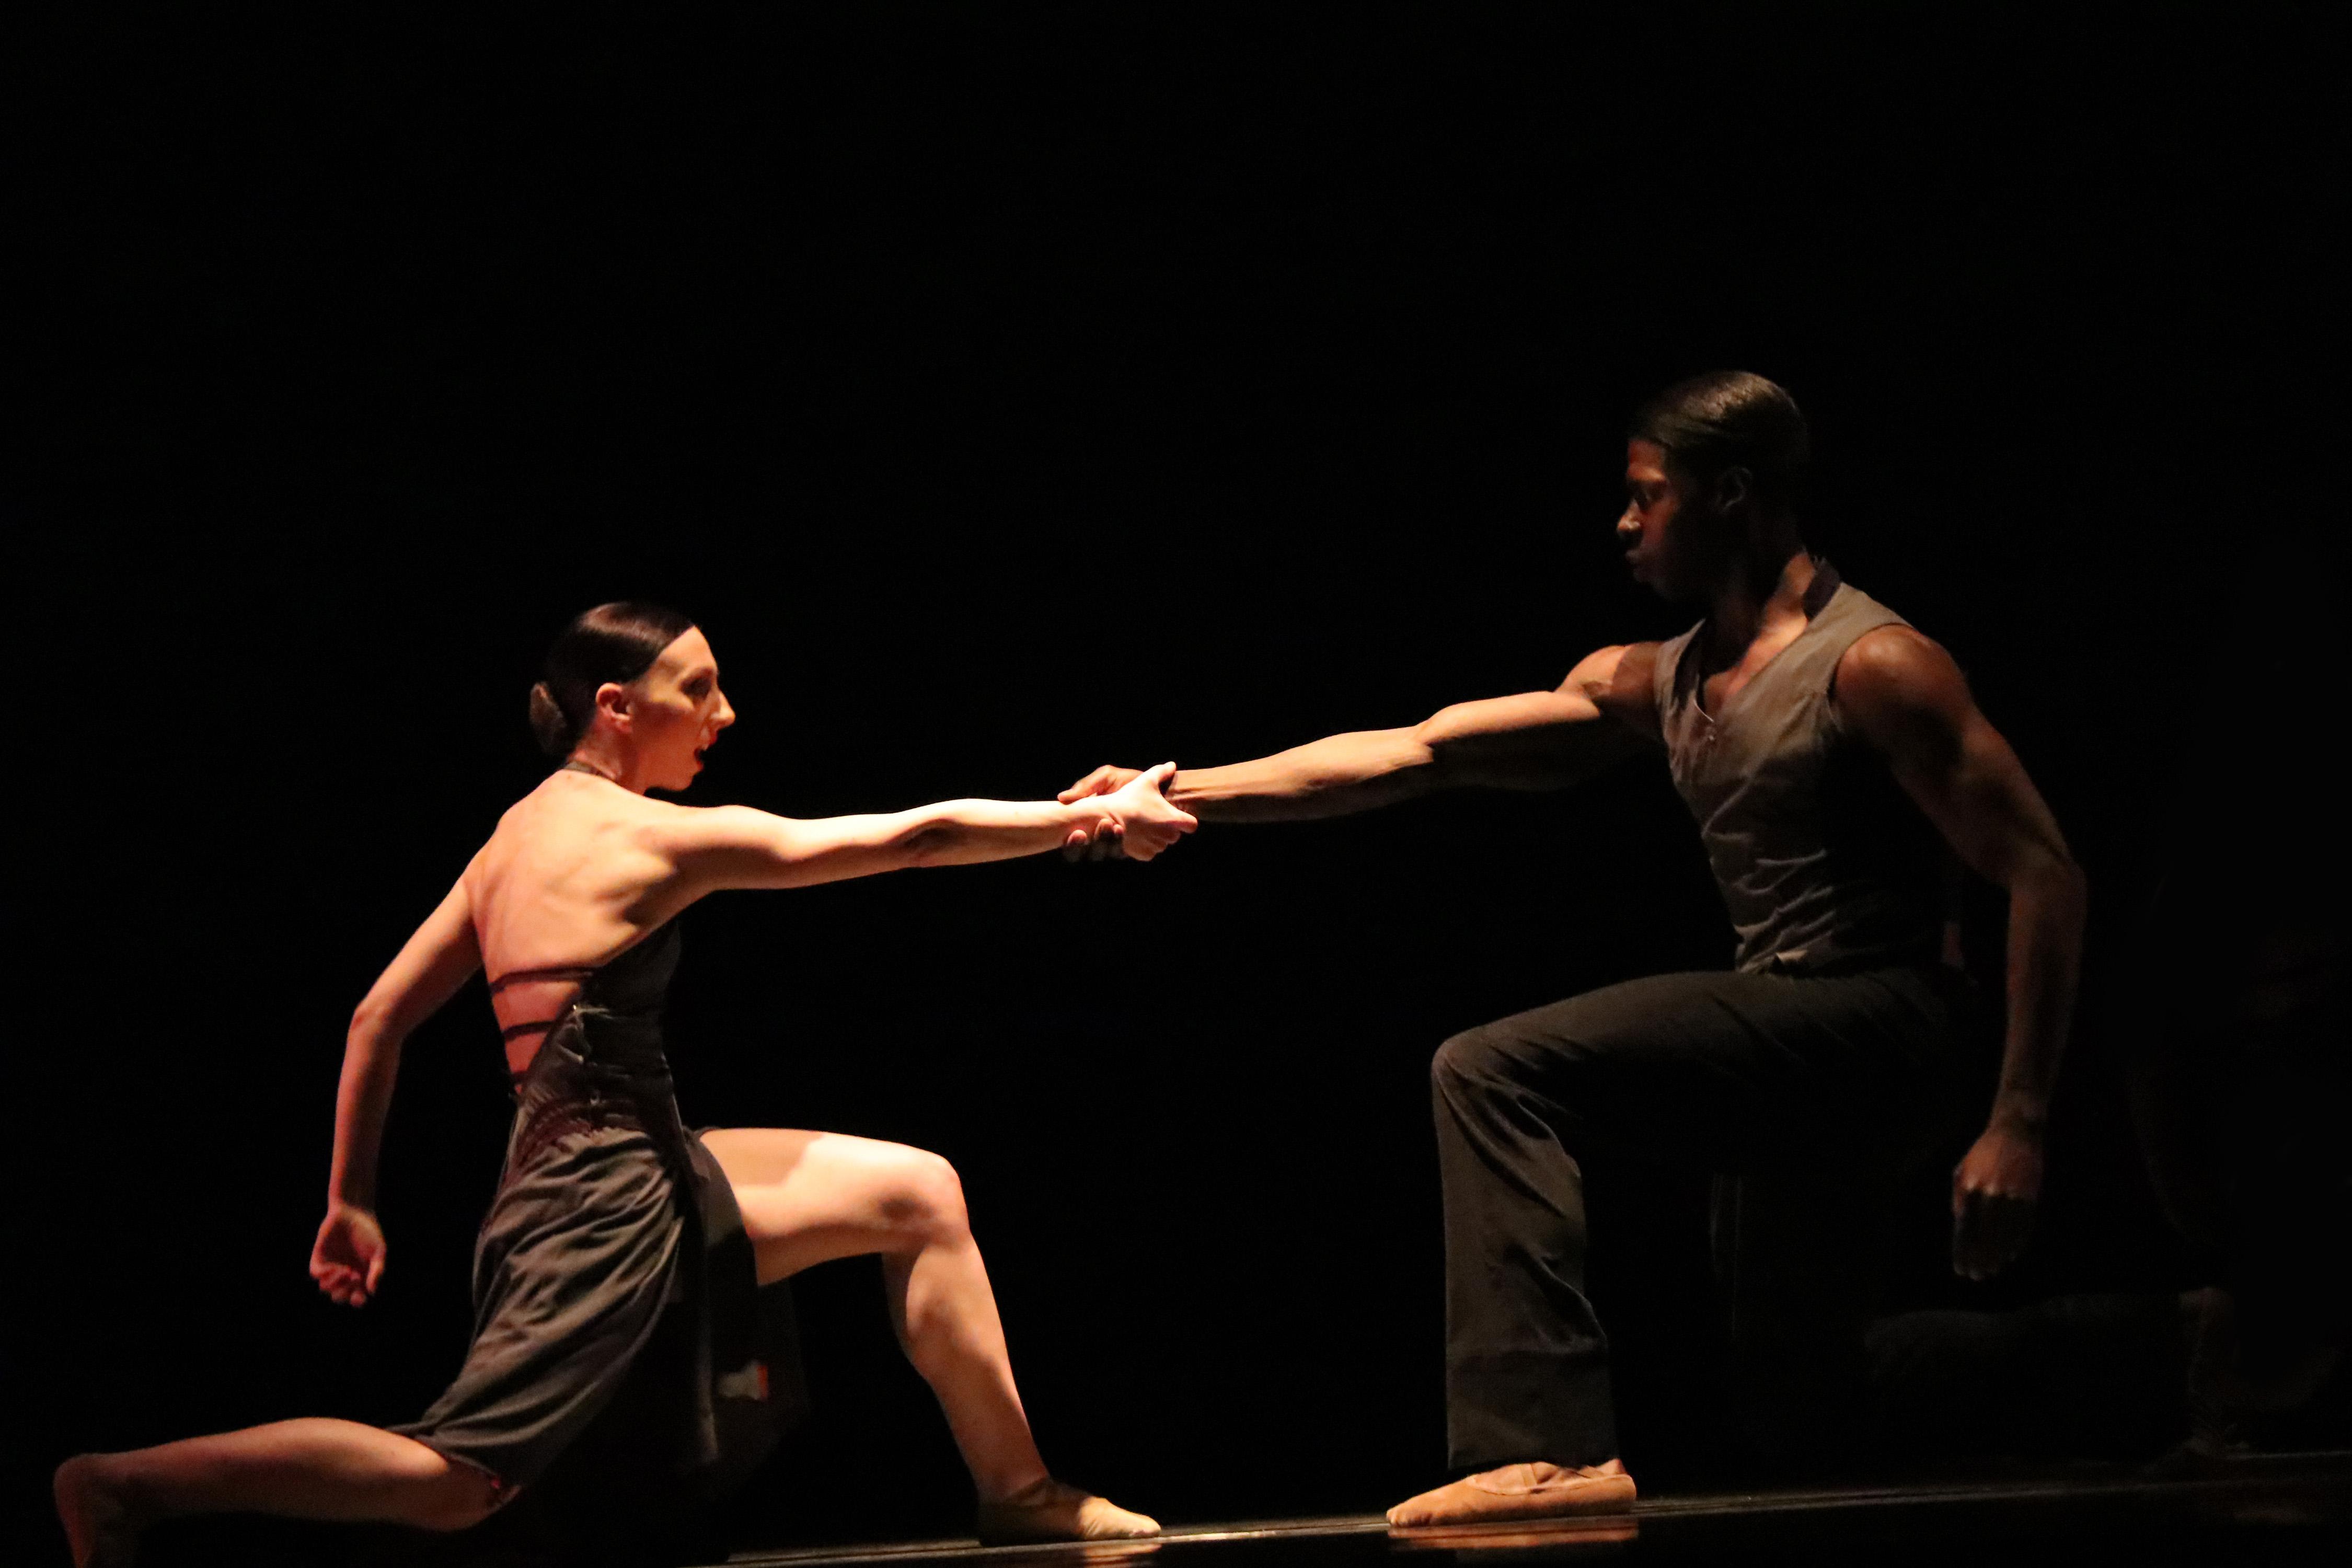 Dancers Maeghan McHale and Devin Buchanan in Brock Clawson’s “Give and Take” (2009). (Photo by Reveuse Photography)